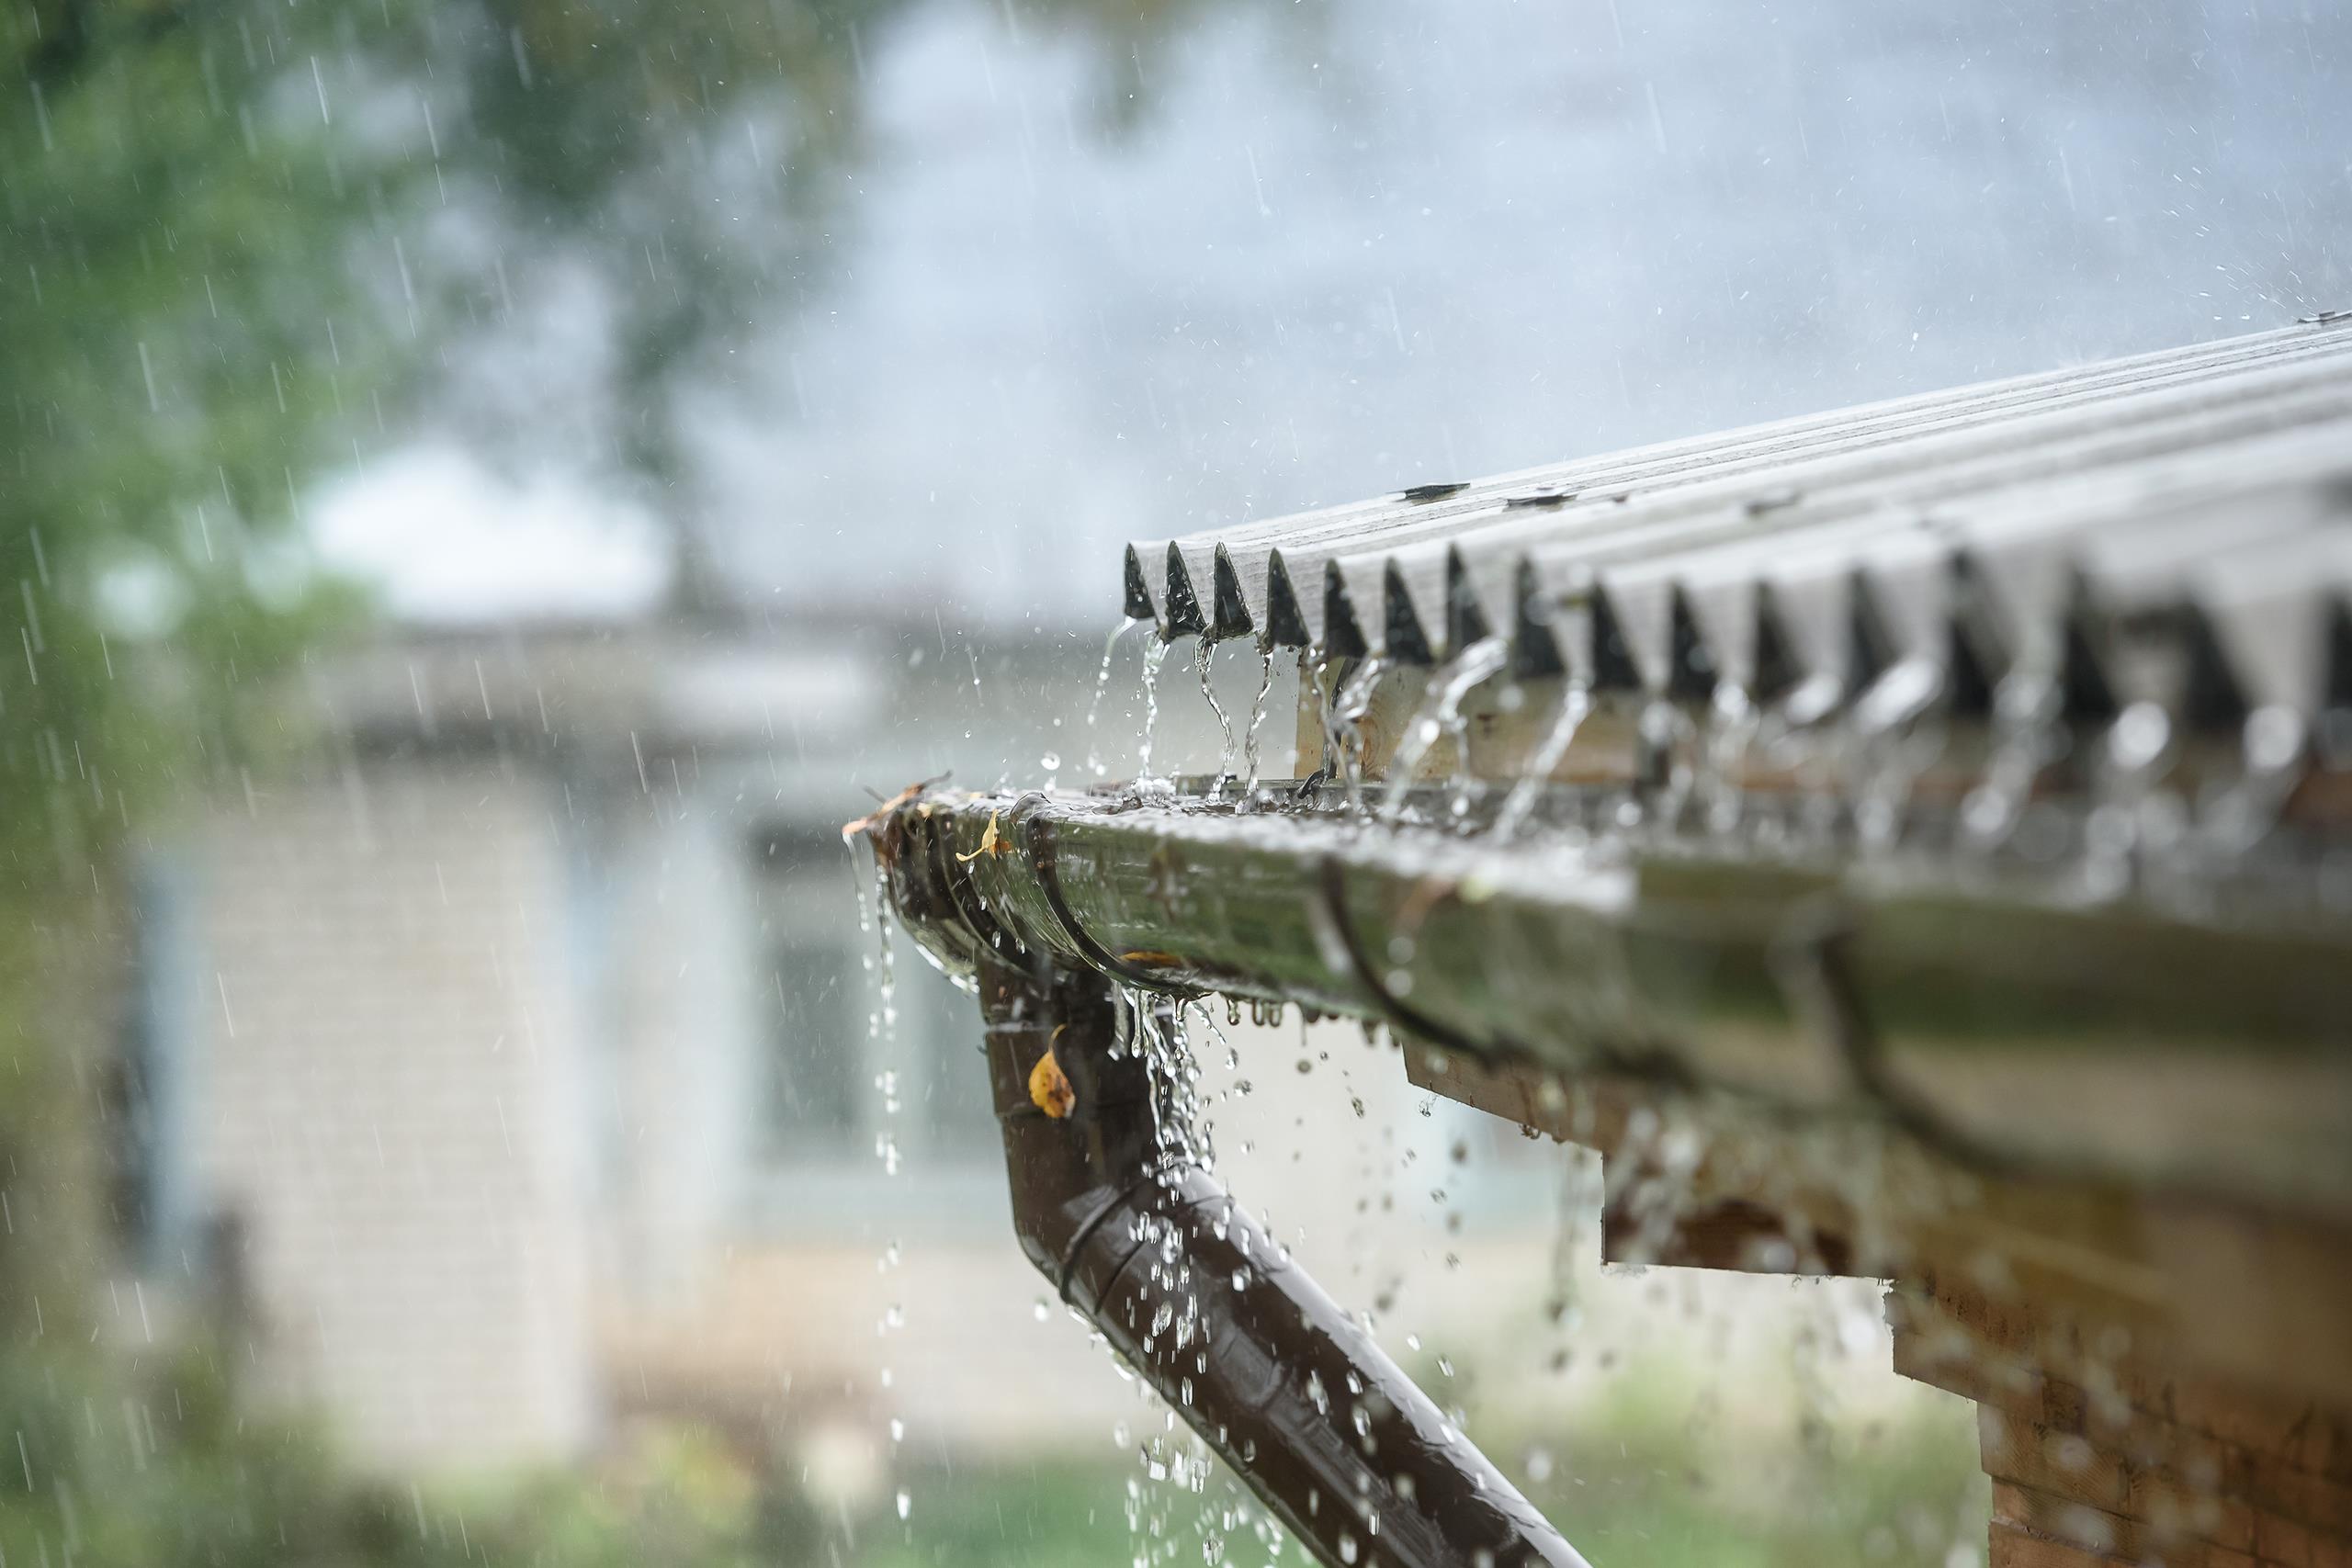 Heavy rainfall almost overflowing from a guttering system